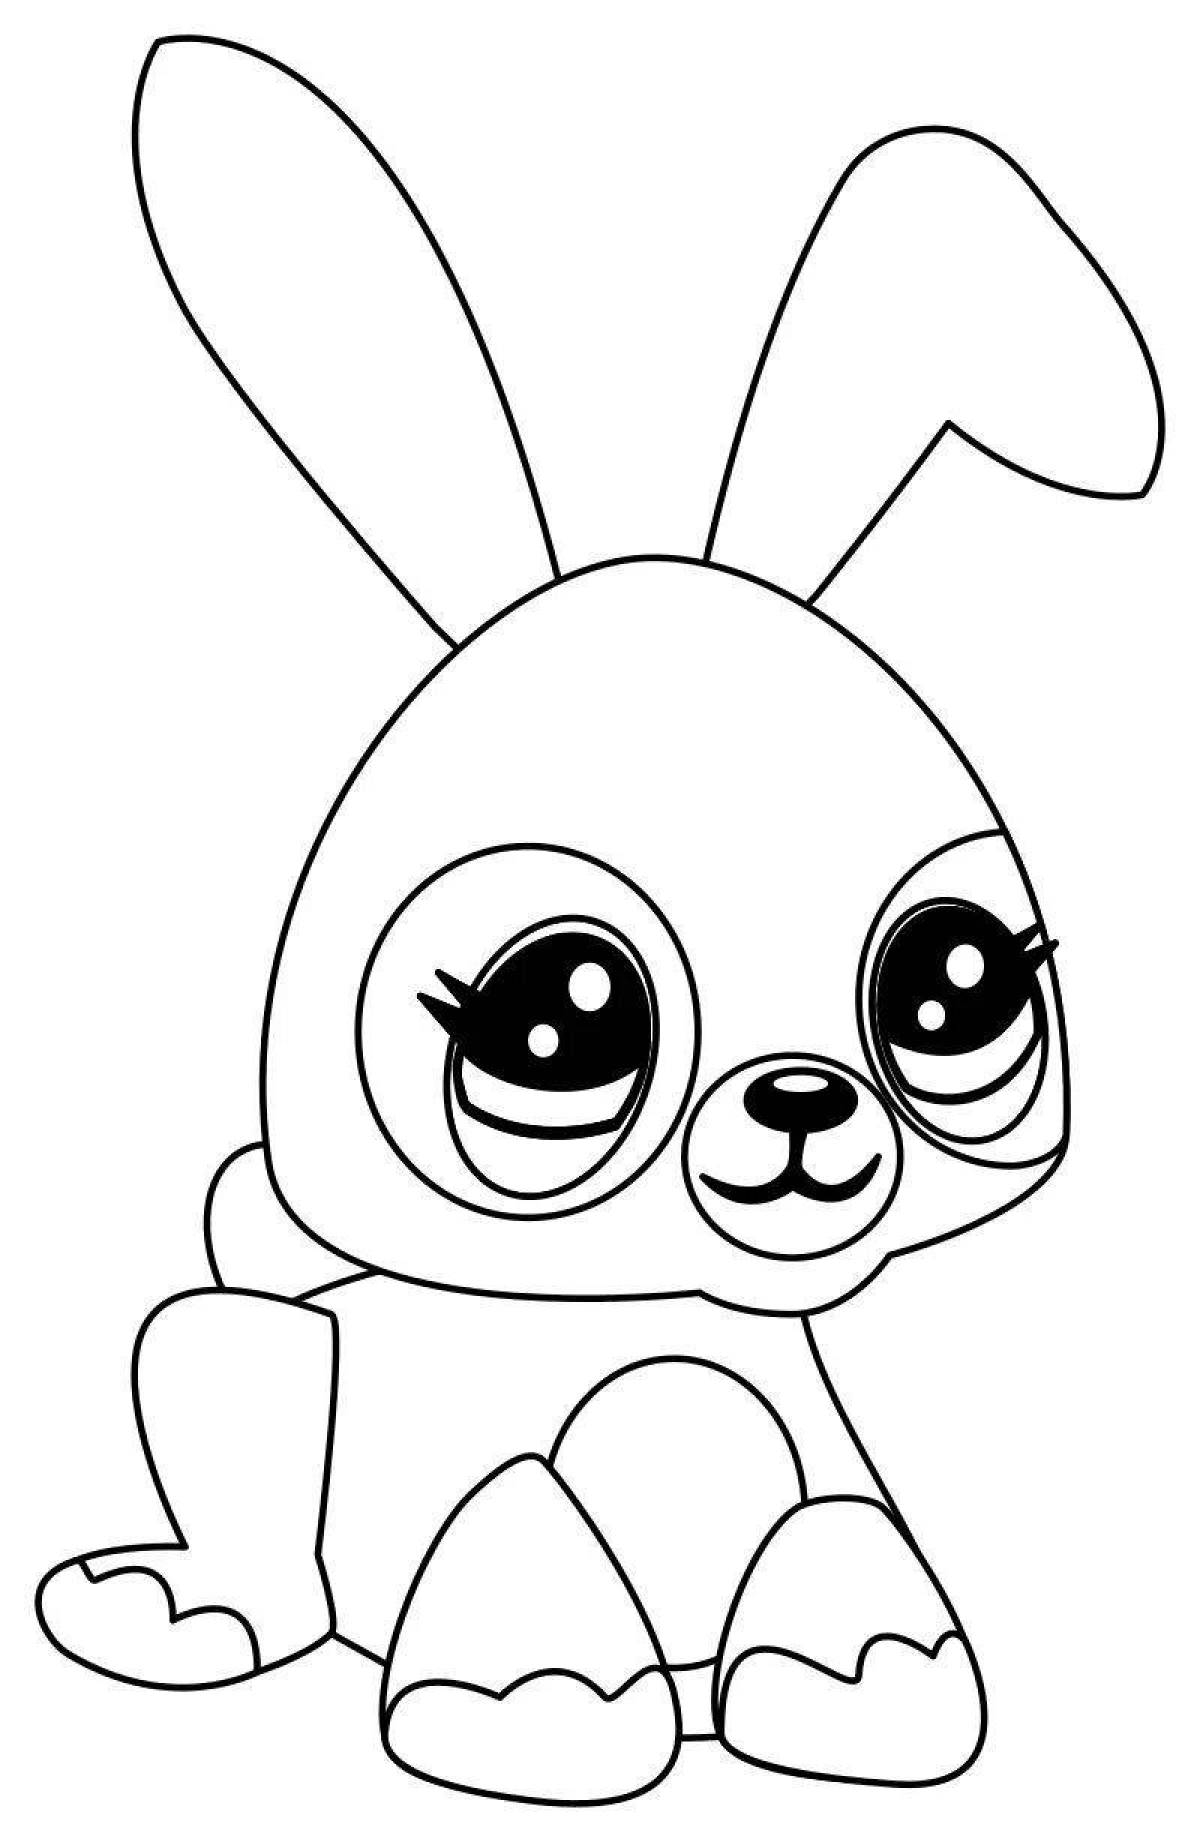 Soft cute bunny coloring book